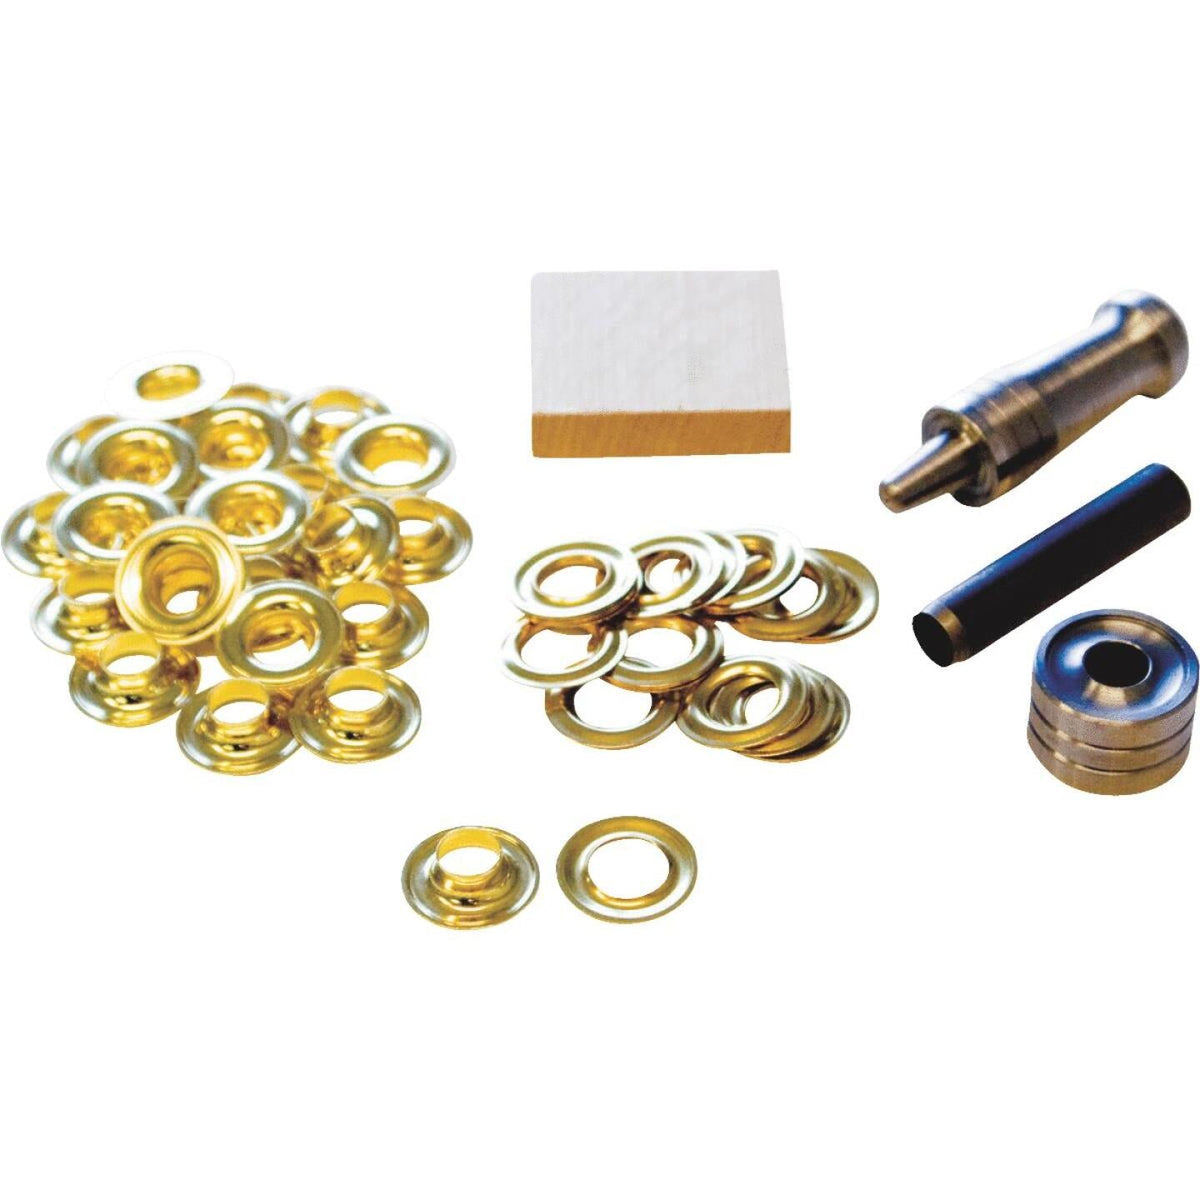 General Tools 1/2 in. Refill Solid Brass Grommet Kit and Refill (12-Pack)  1261-4 - The Home Depot